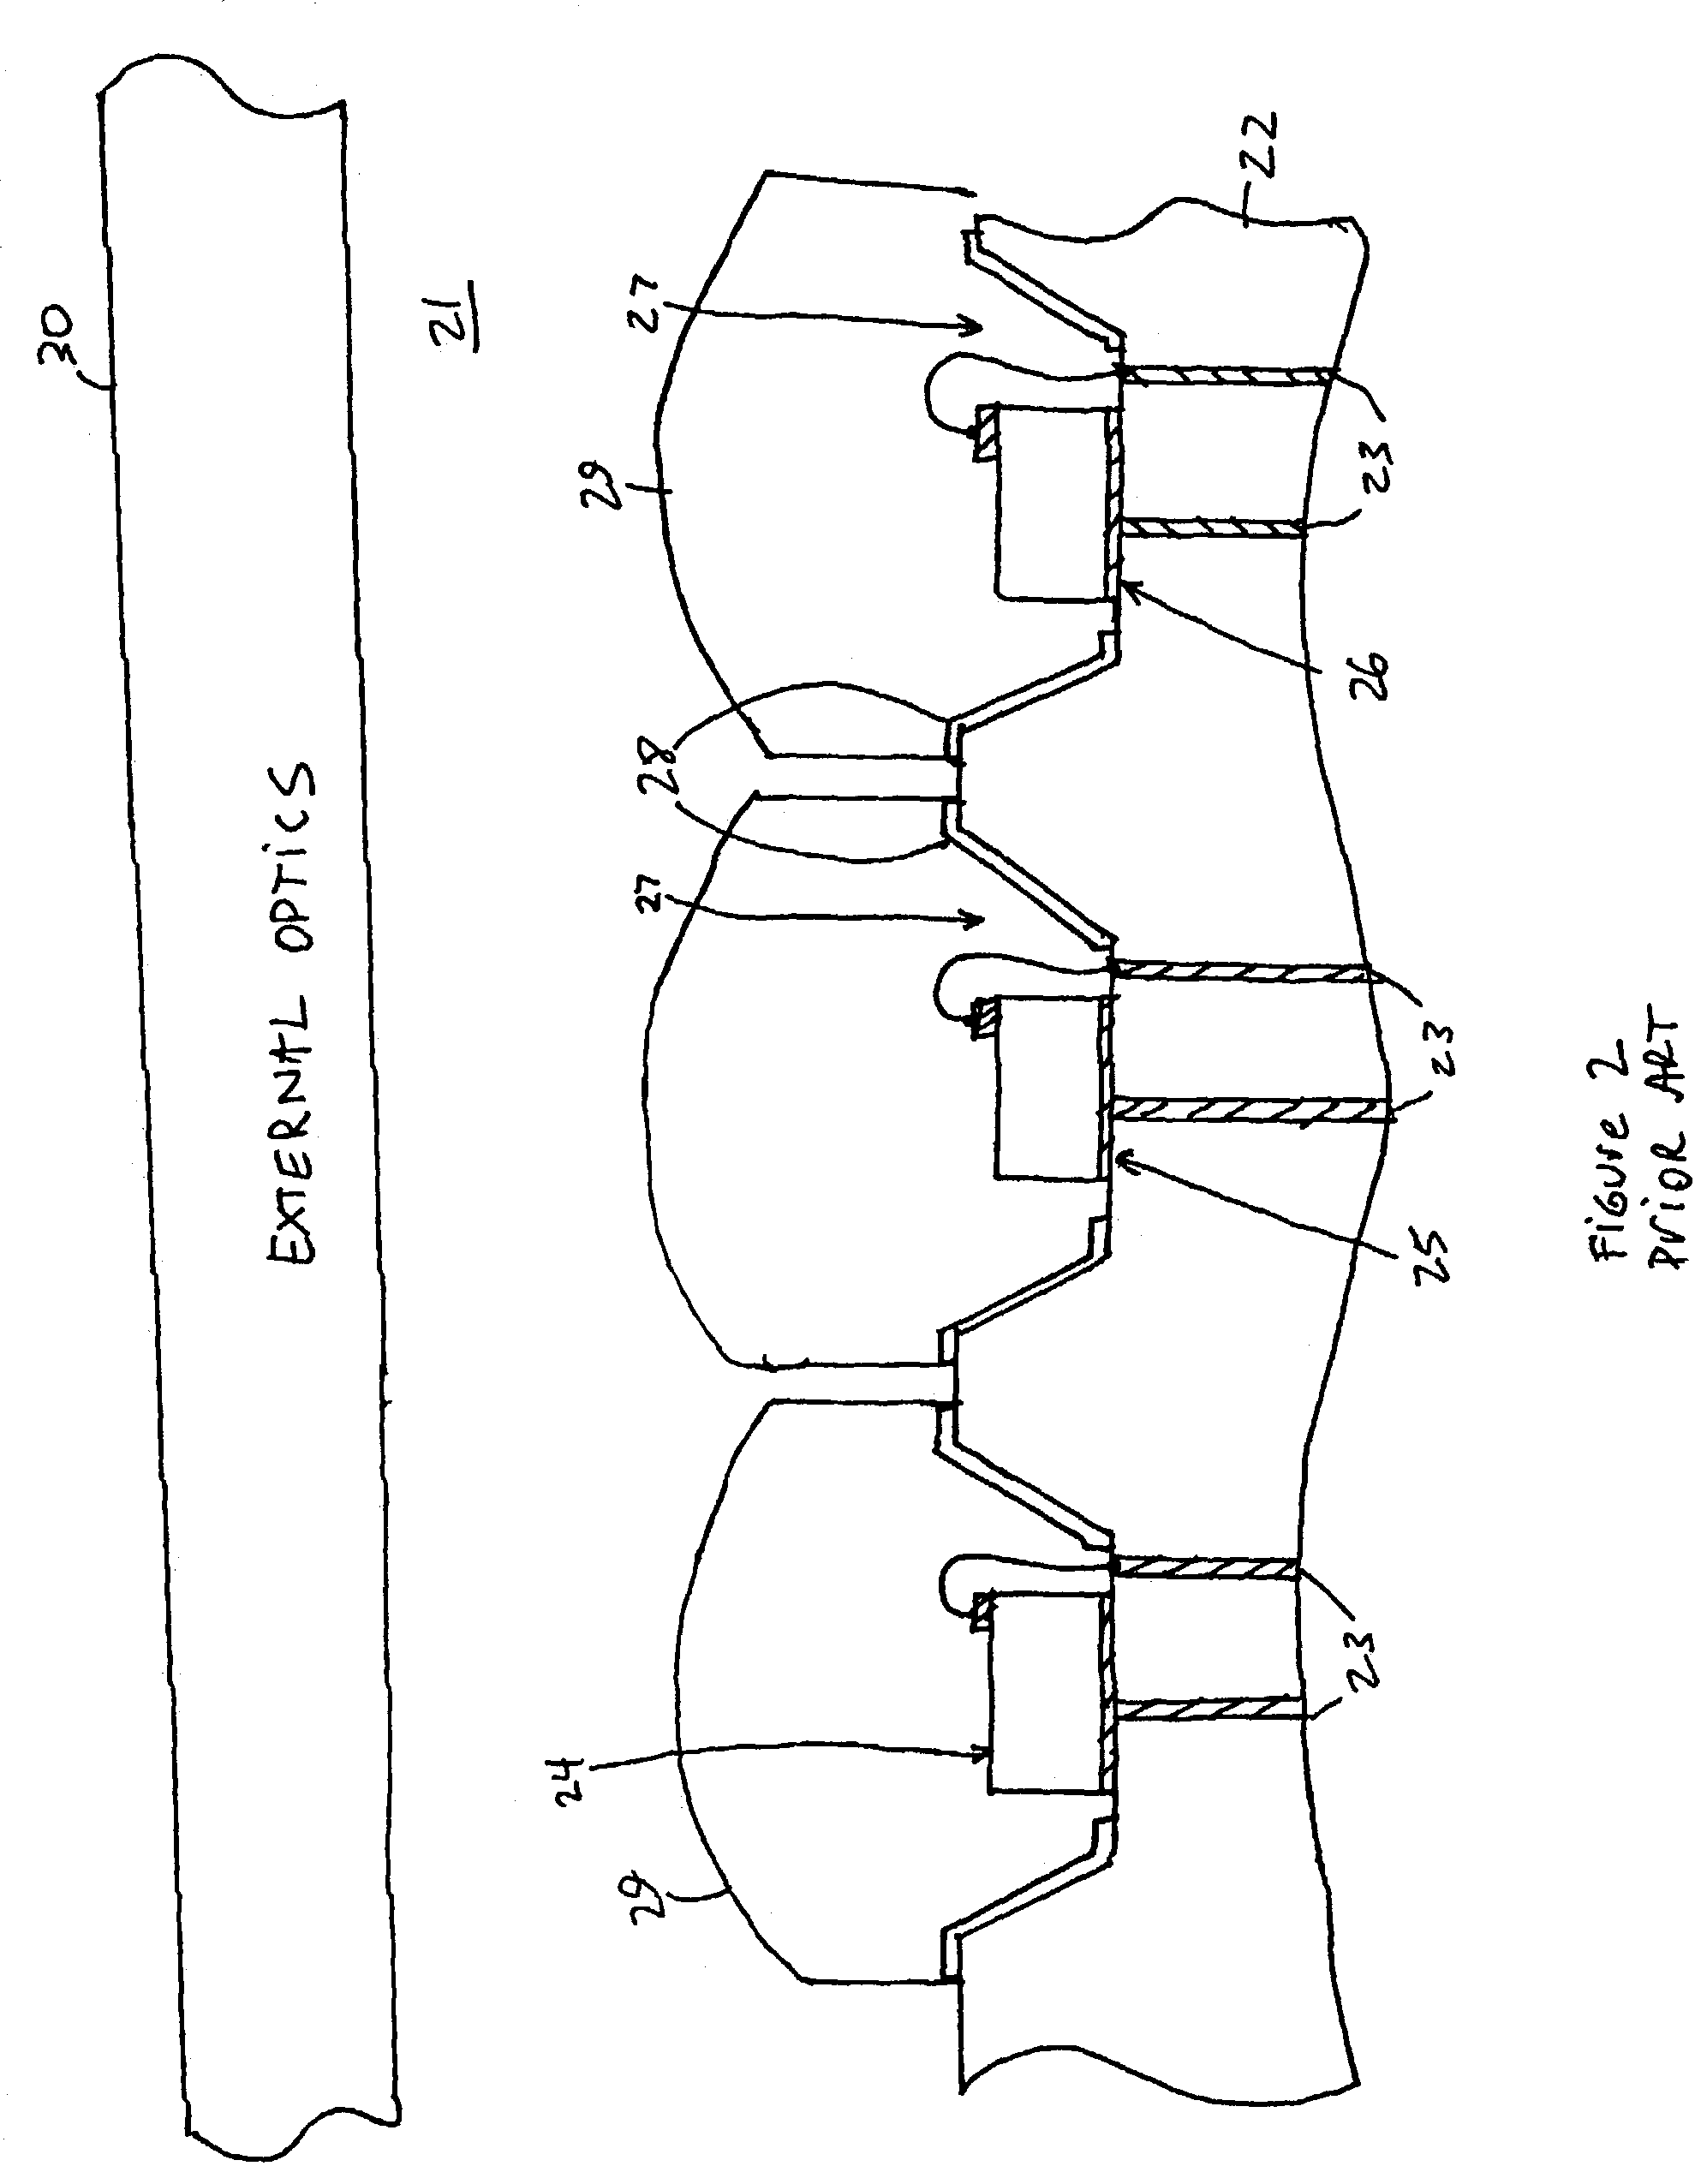 Solid state lighting device with reduced form factor including LED with directional emission and package with microoptics